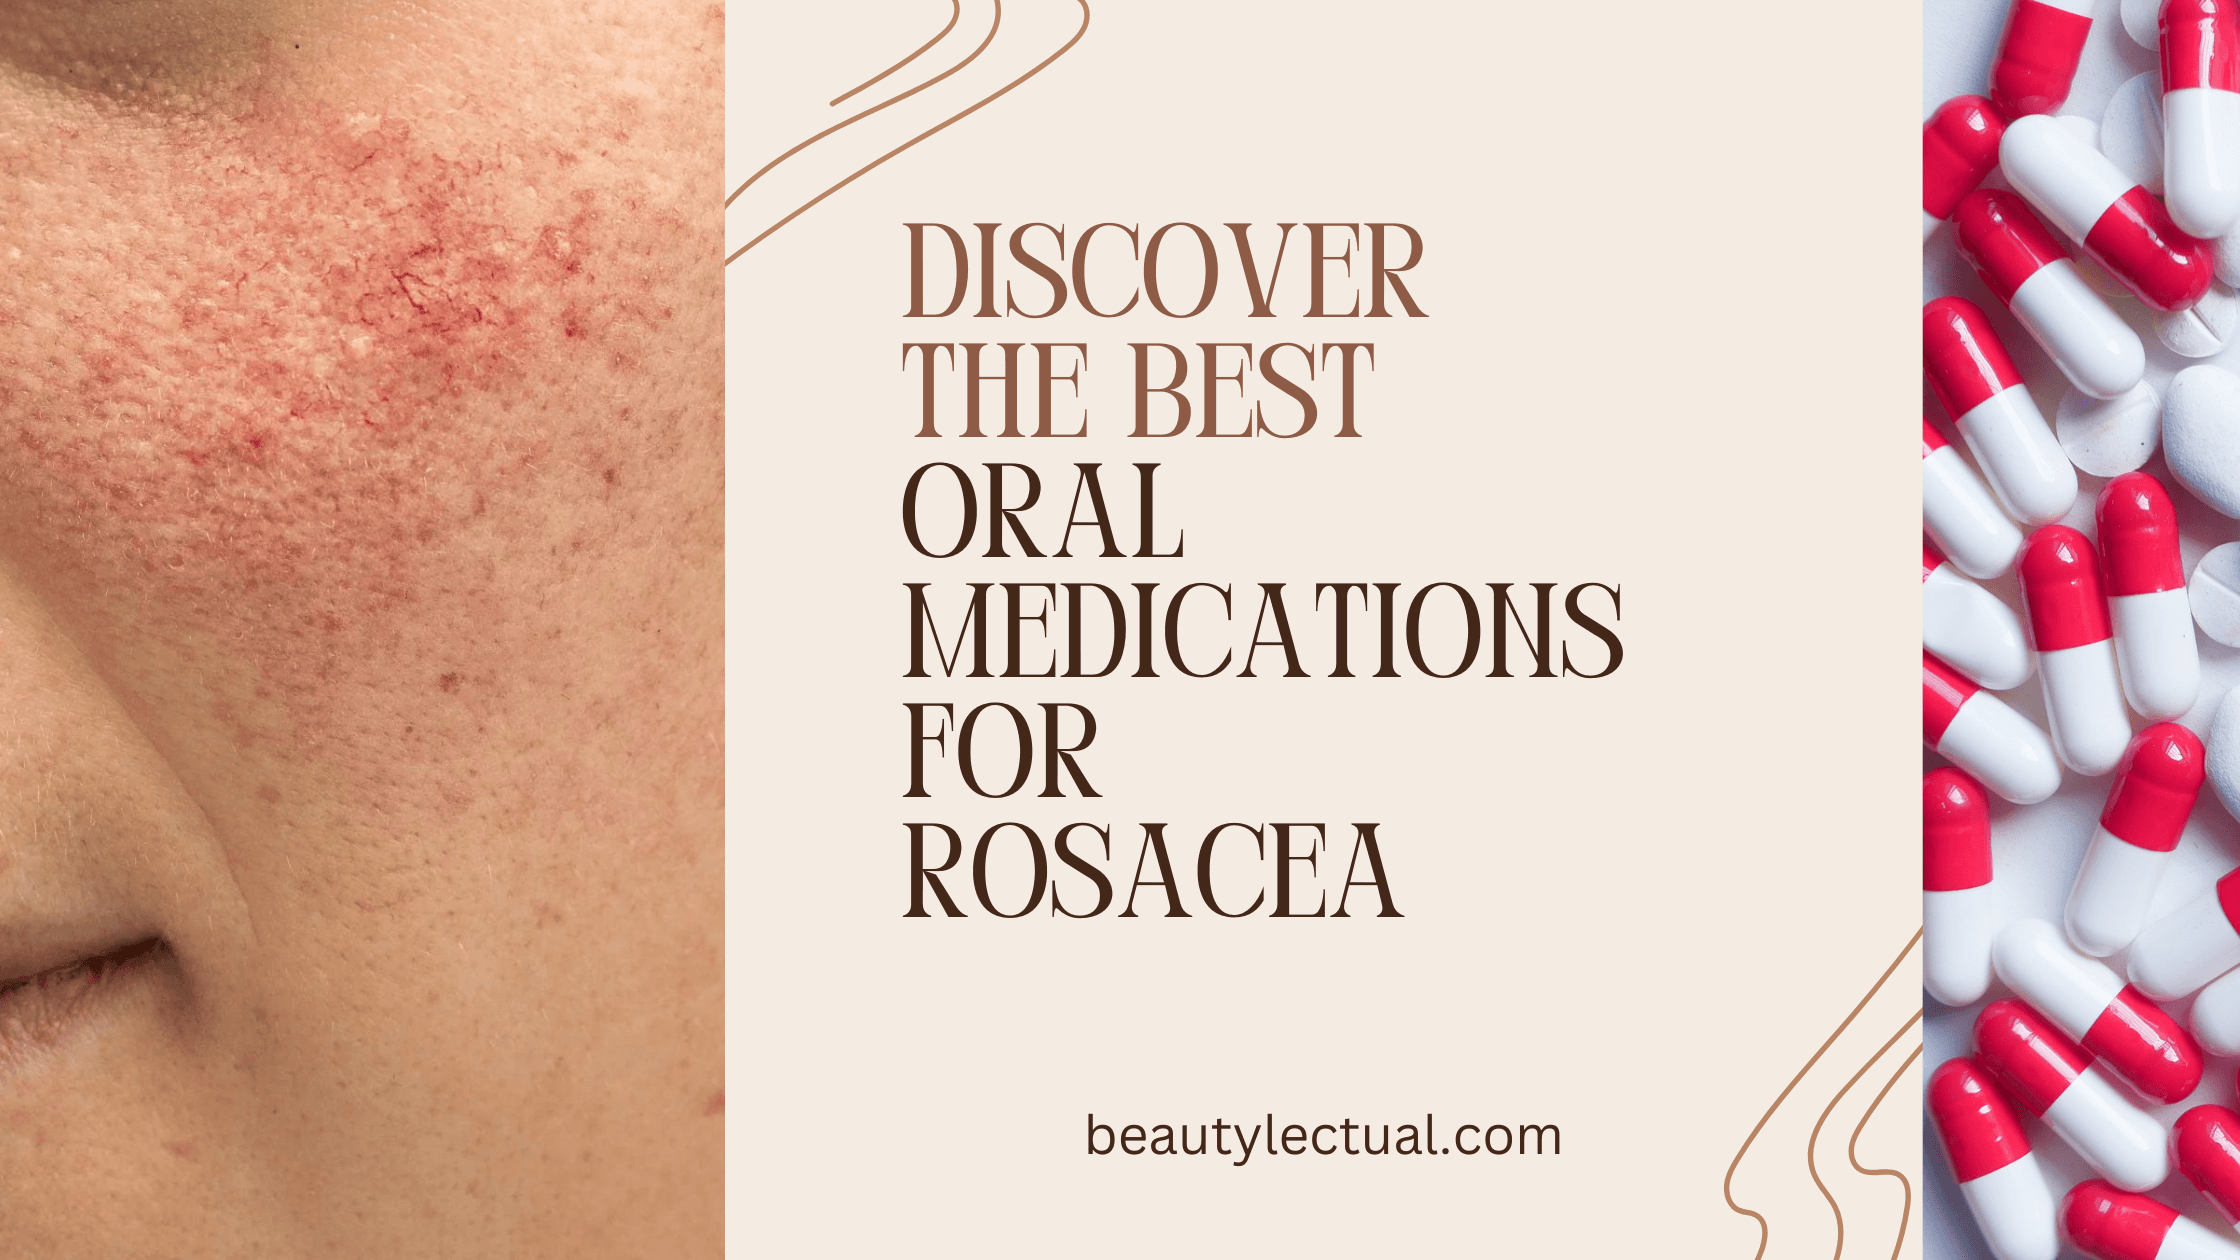 Oral medications for rosacea